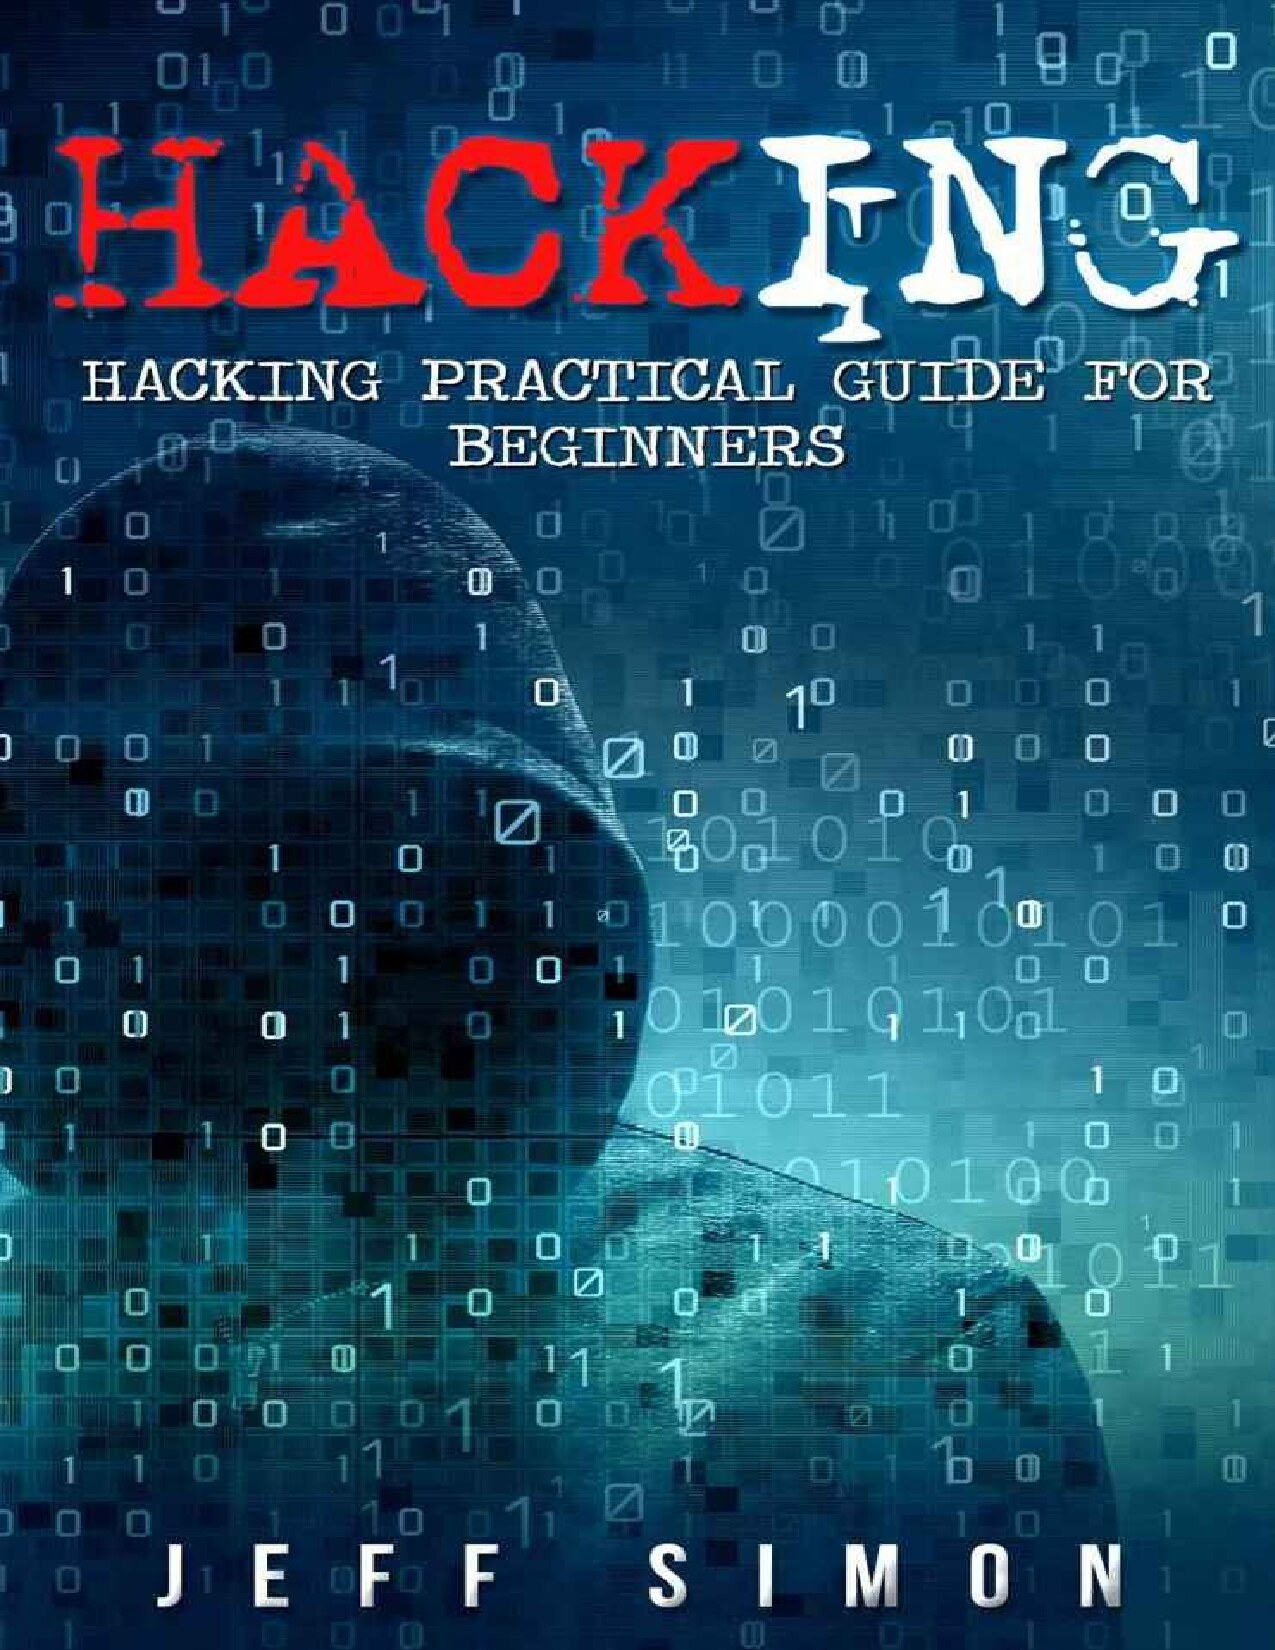 Hacking: Hacking Practical Guide for Beginners - PDFDrive.com